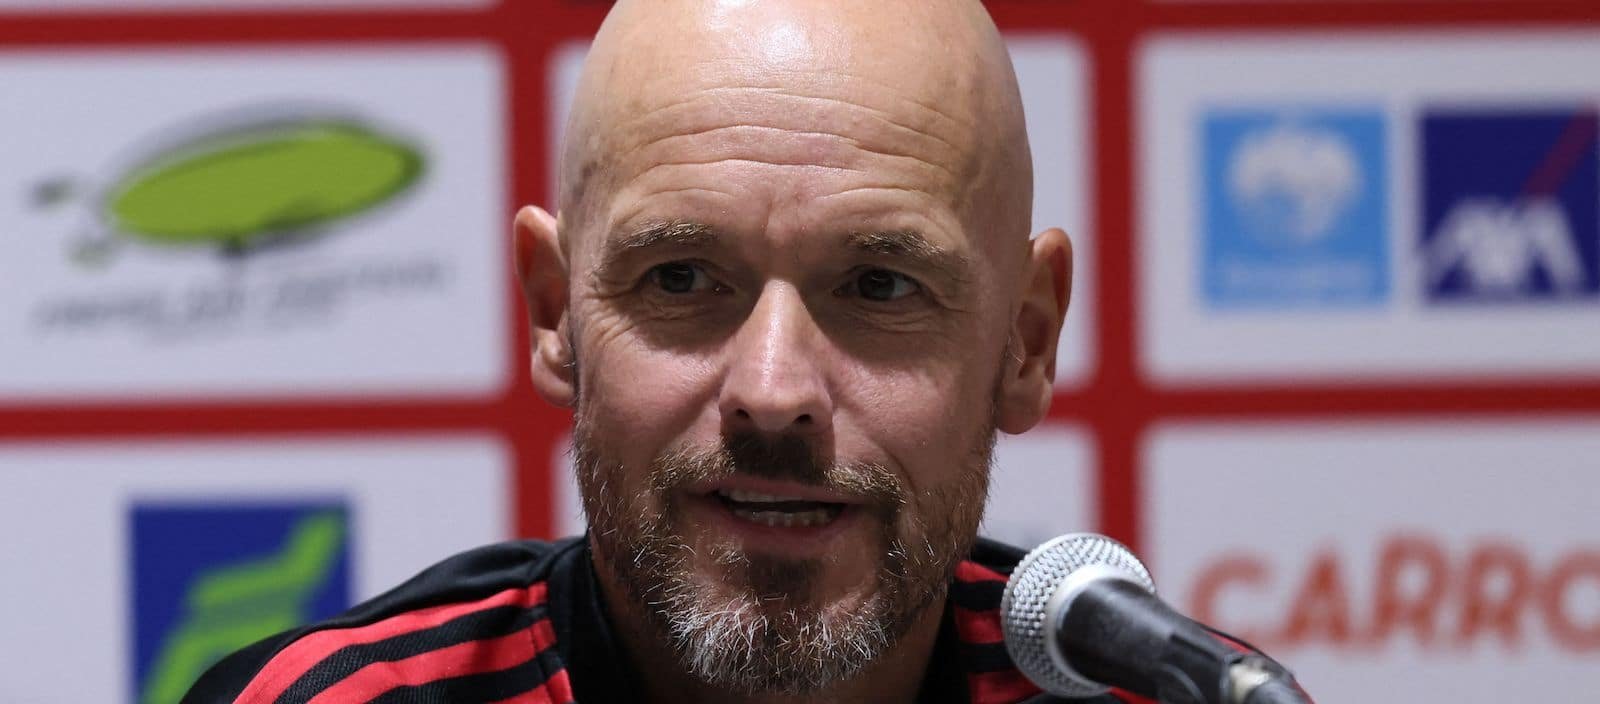 Erik ten Hag says he has not spoken to INEOS at all regarding Manchester United – Man United News And Transfer News